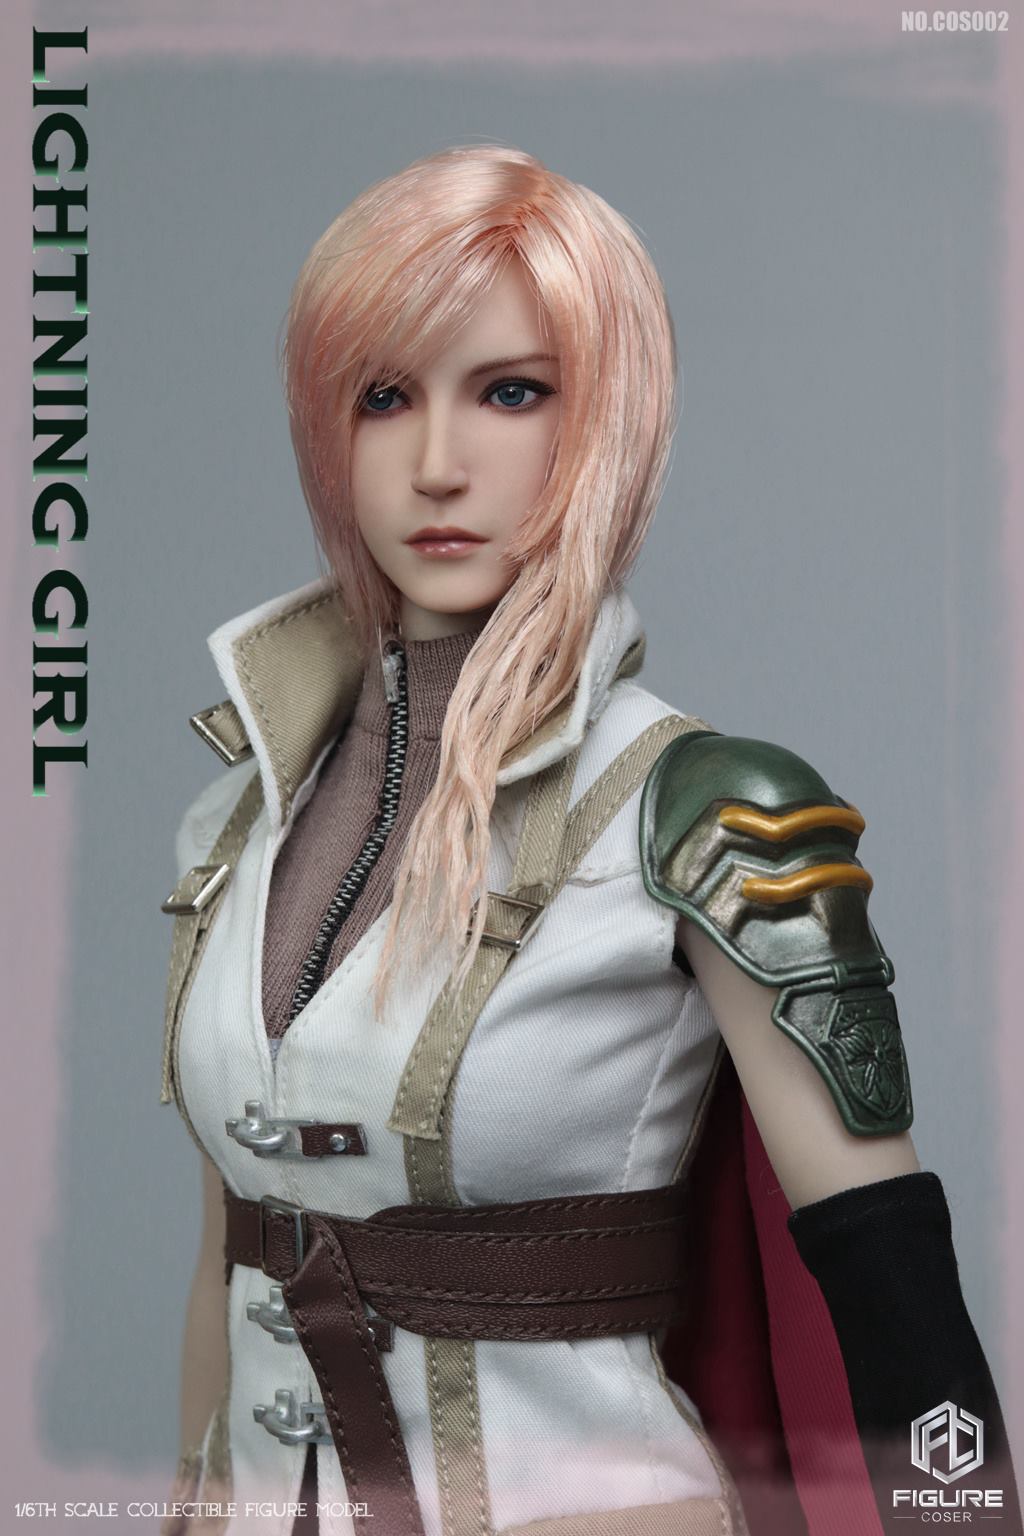 toyhaven: Figurecoser 1/6th scale Lightning Girl Outfit & Head Sculpt